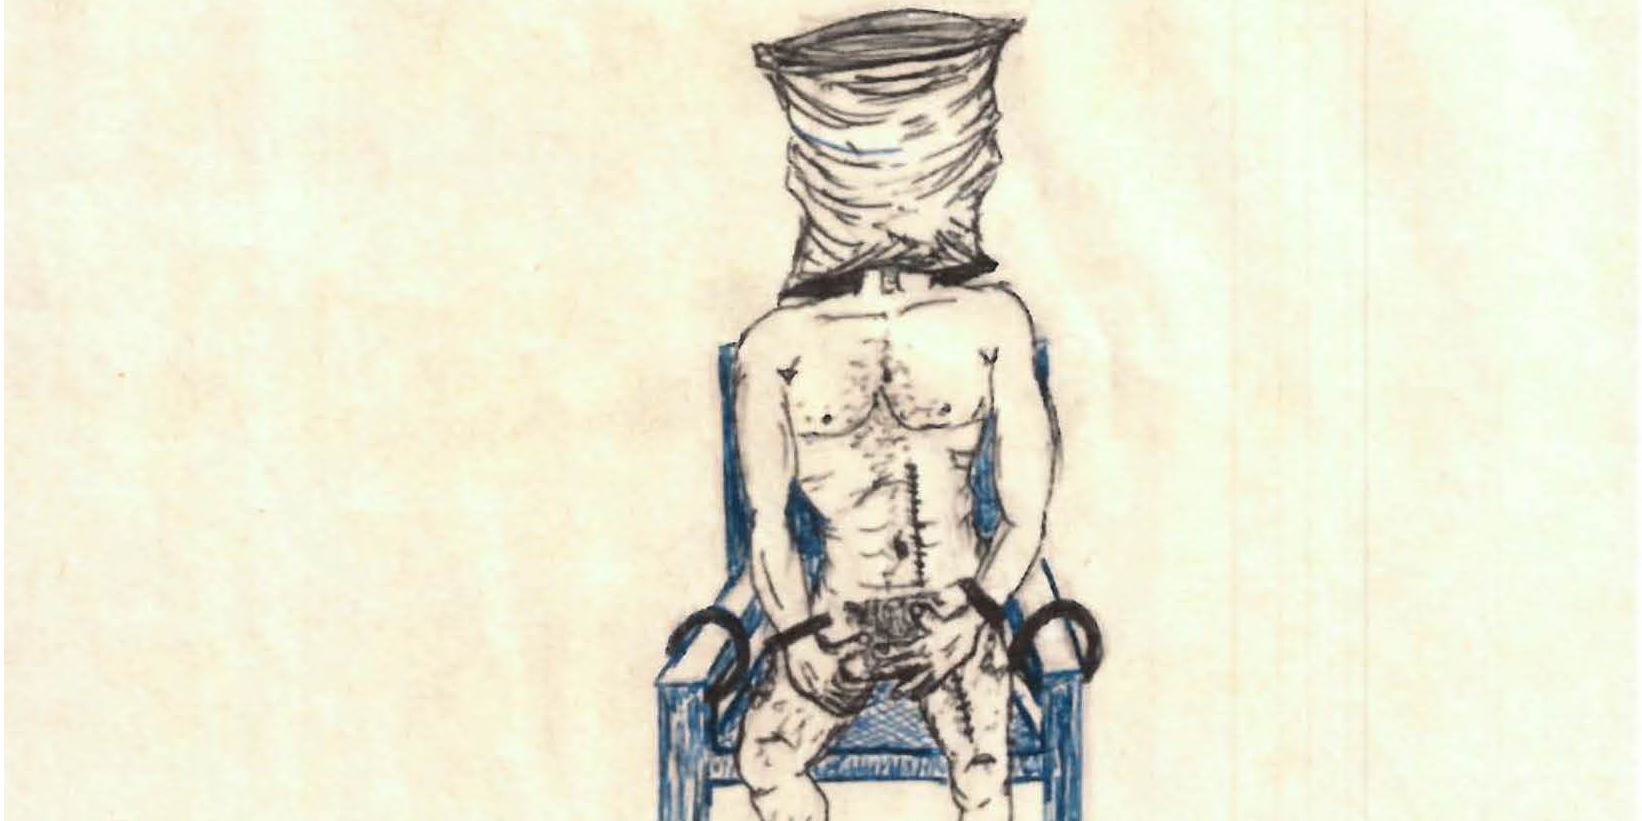 A Guantánamo Bay detainee's drawings show the brutal CIA torture he